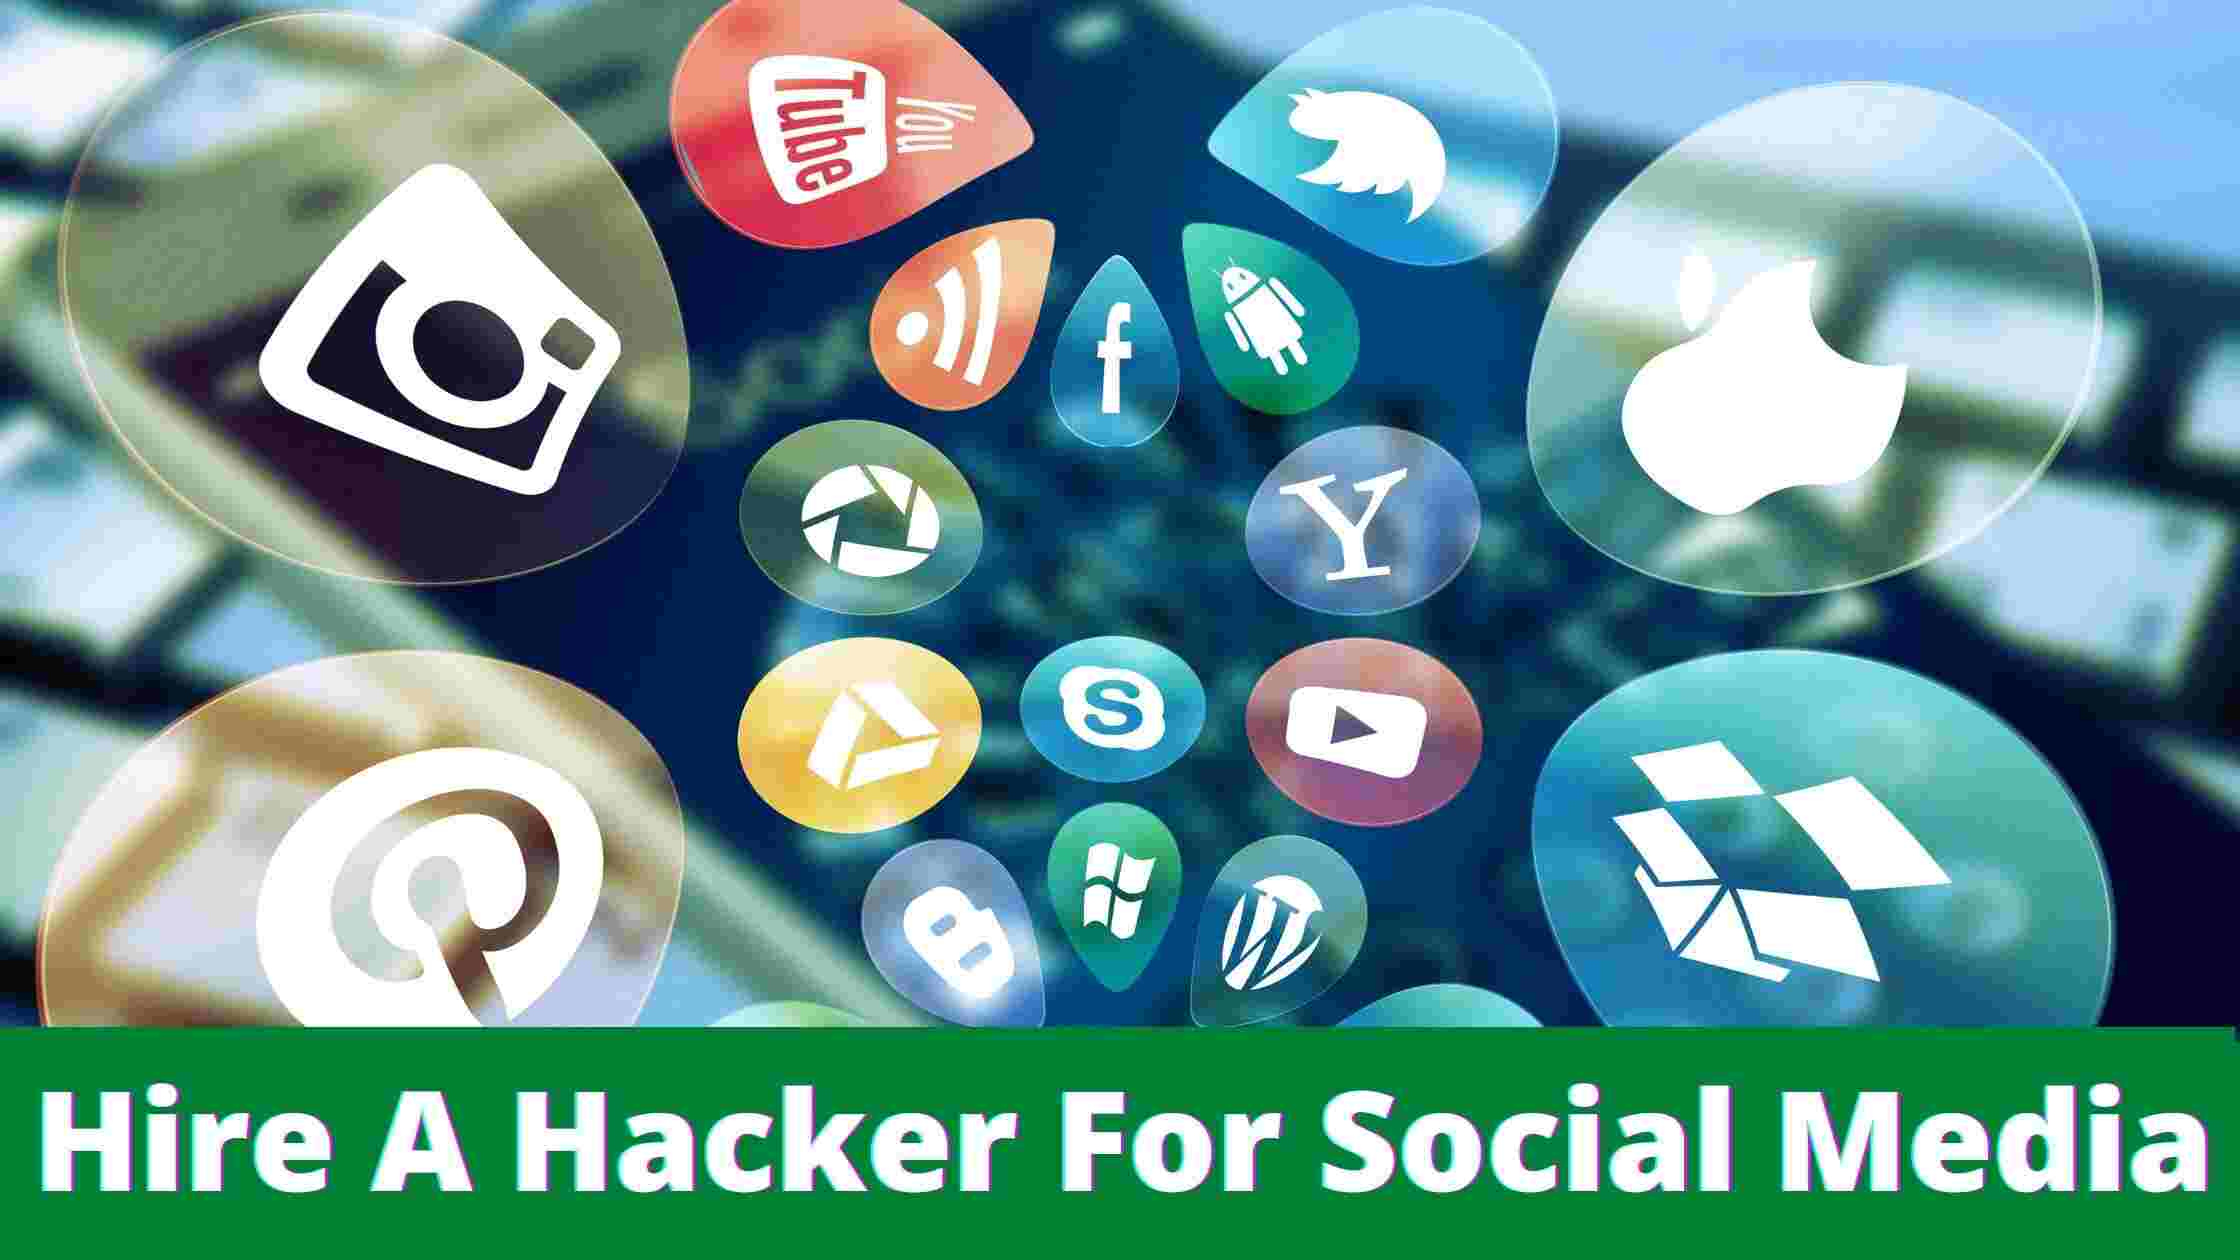 Social Media hackers for hire